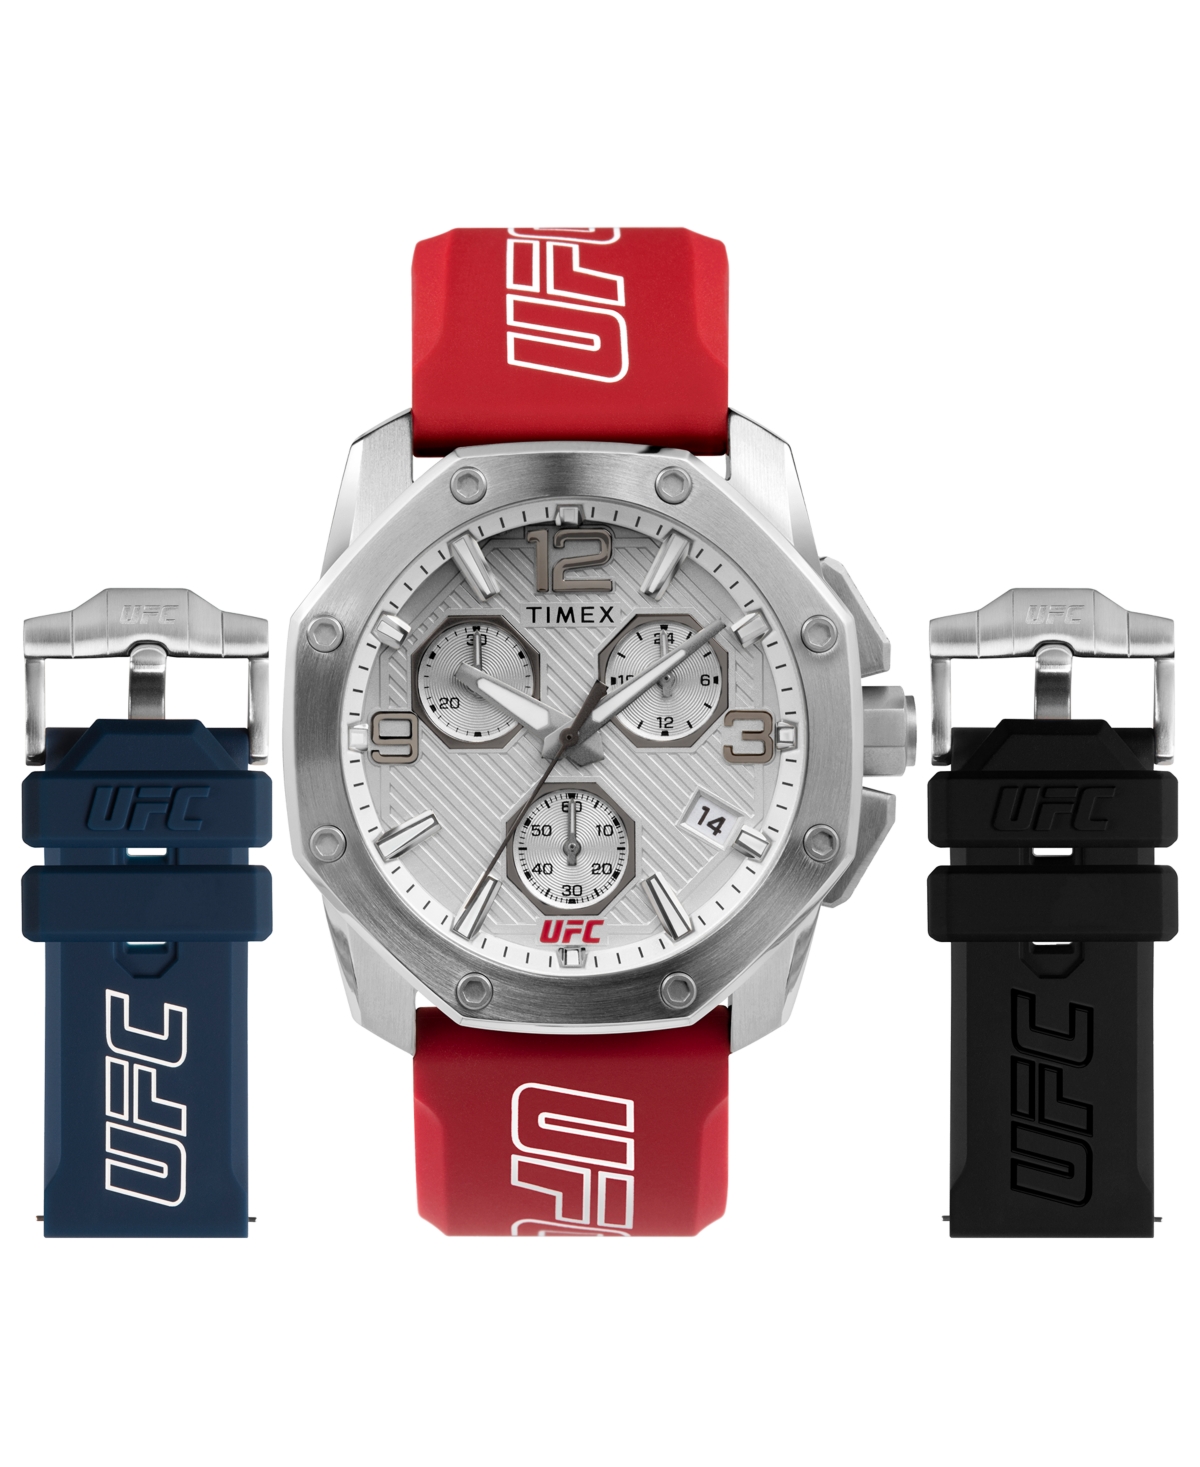 Ufc Men's Quartz Icon Red Silicone Watch 45mm and Strap Gift Set - Red